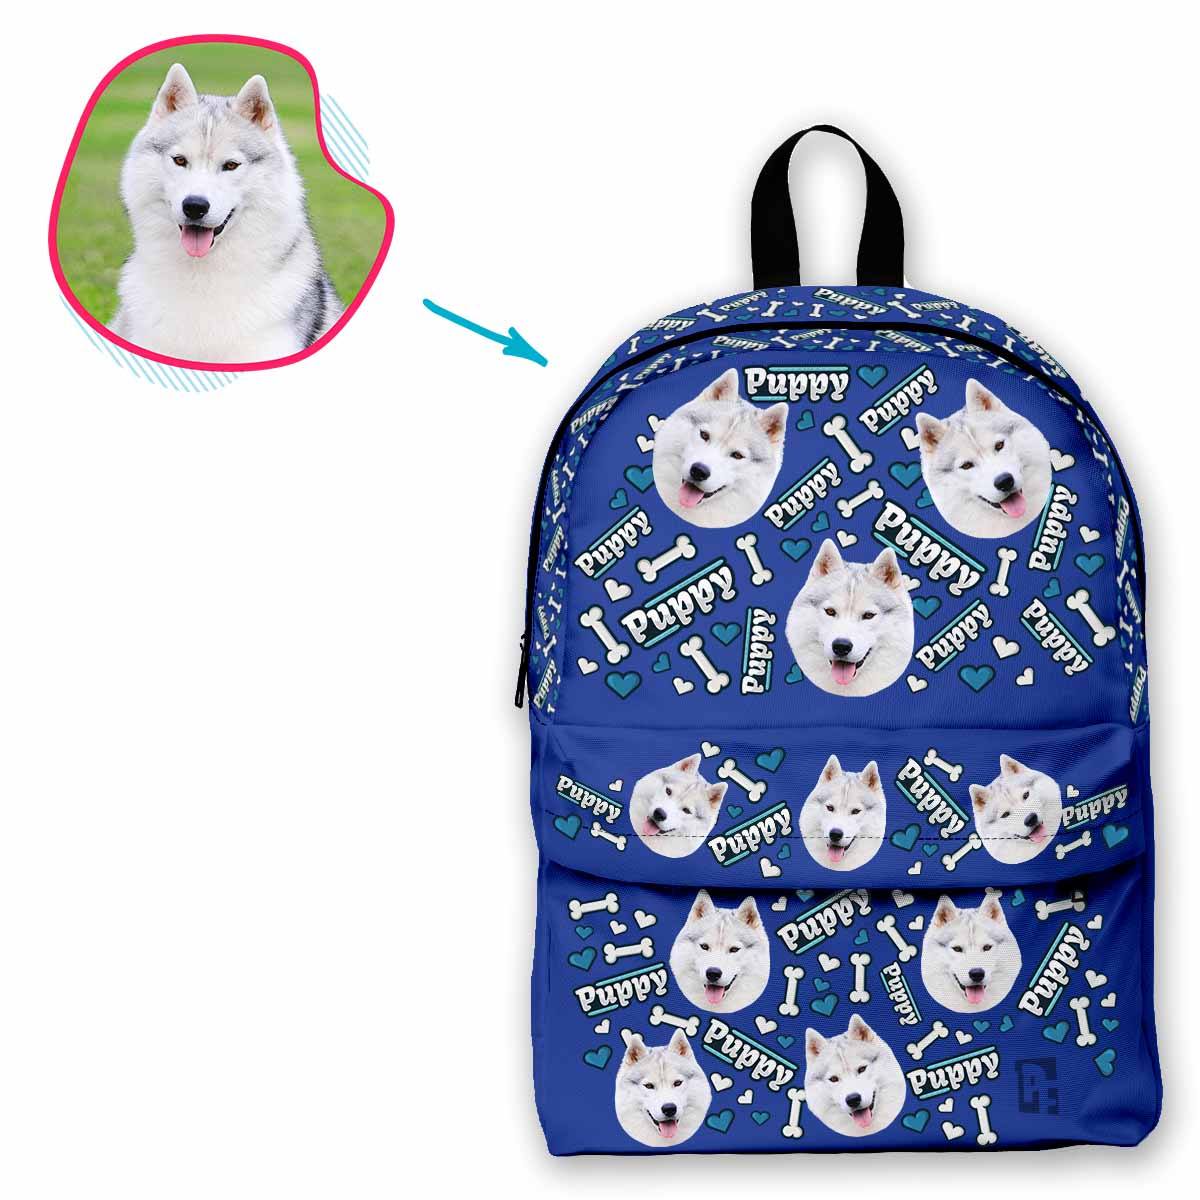 darkblue Puppy classic backpack personalized with photo of face printed on it